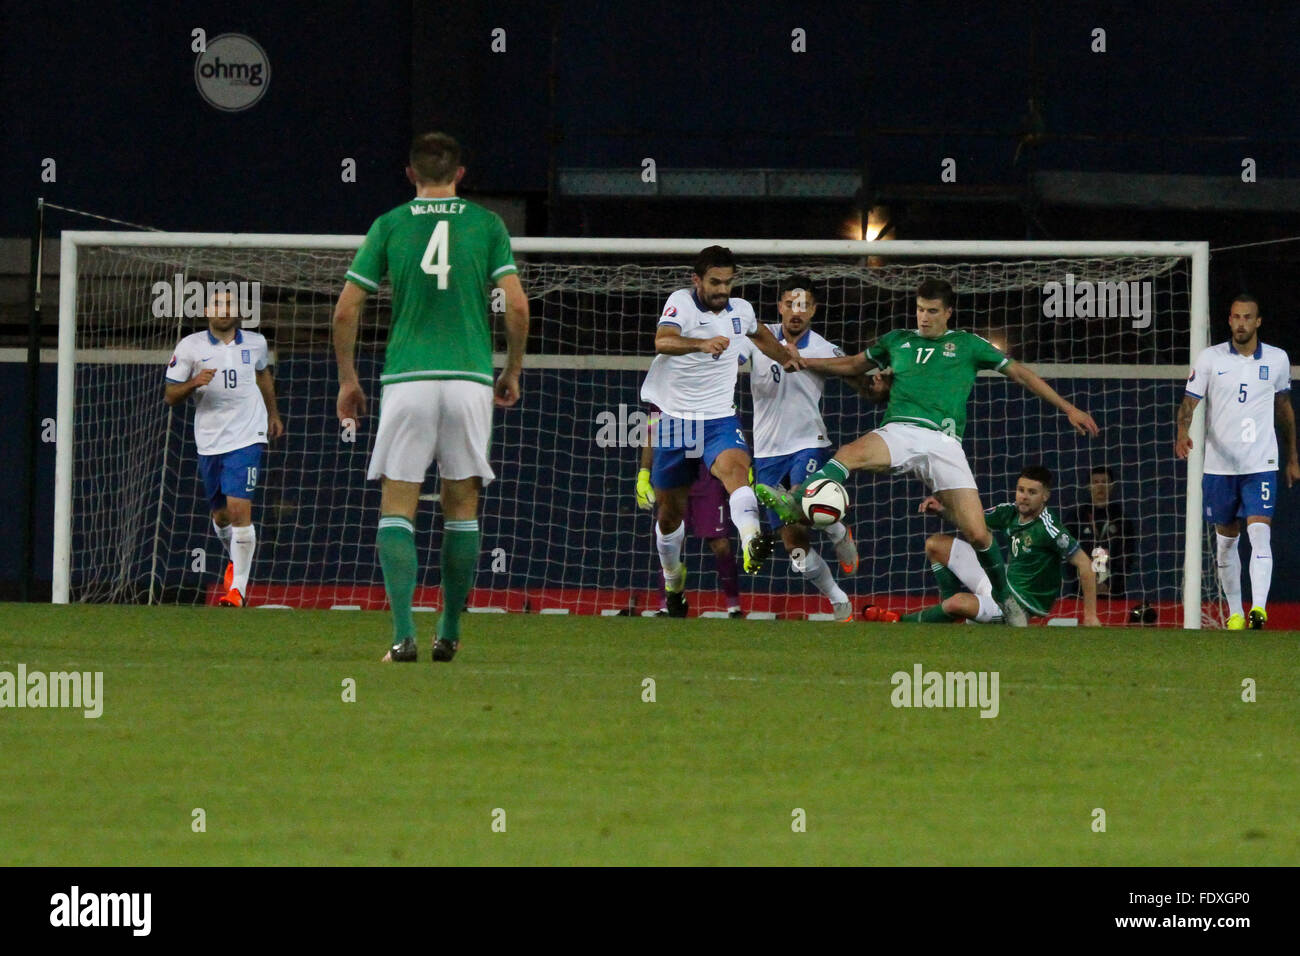 08 Oct 2015 - Euro 2016 Qualifier - Group F - Northern Ireland 3 Greece 1. Paddy McNair (17) under pressure from Greek defenders Alexandros Tziolis (left) and Panagiotis Kone (8). Stock Photo